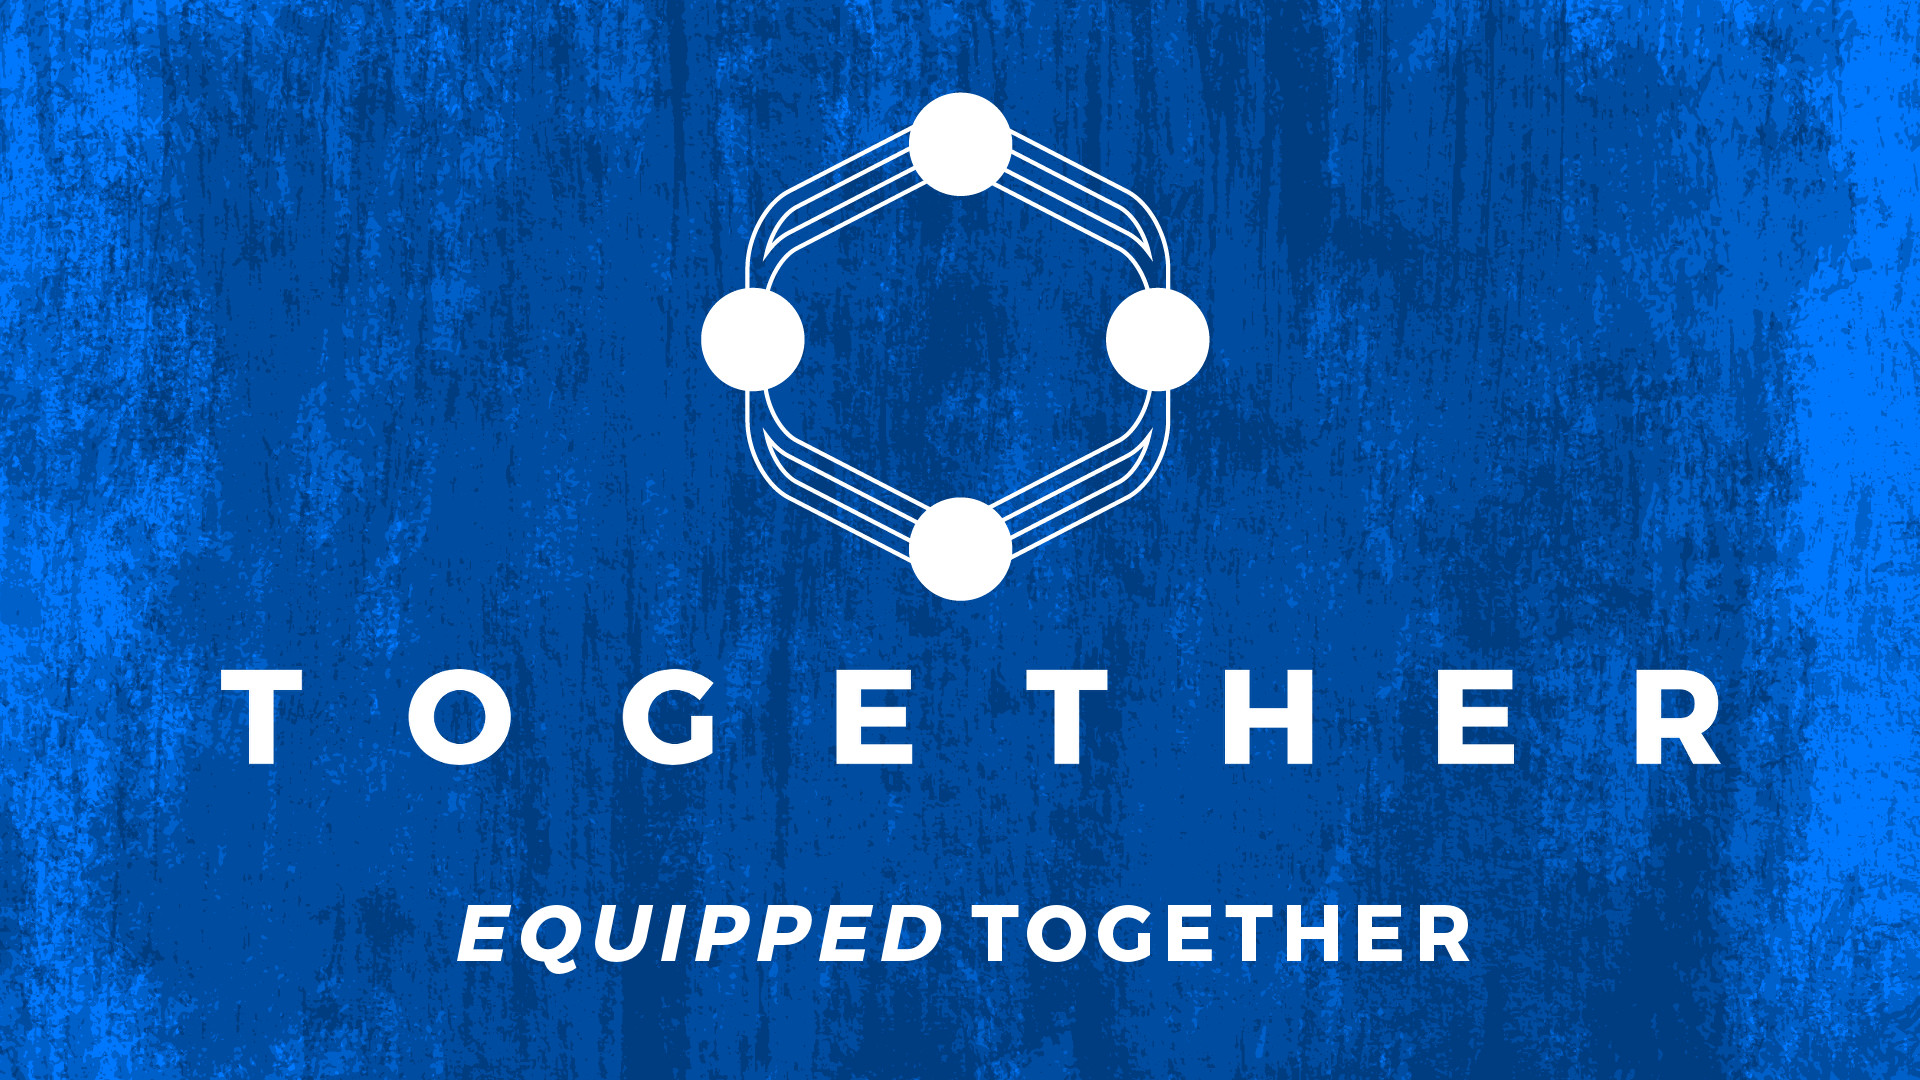 TOGETHER | “Equipped” Together